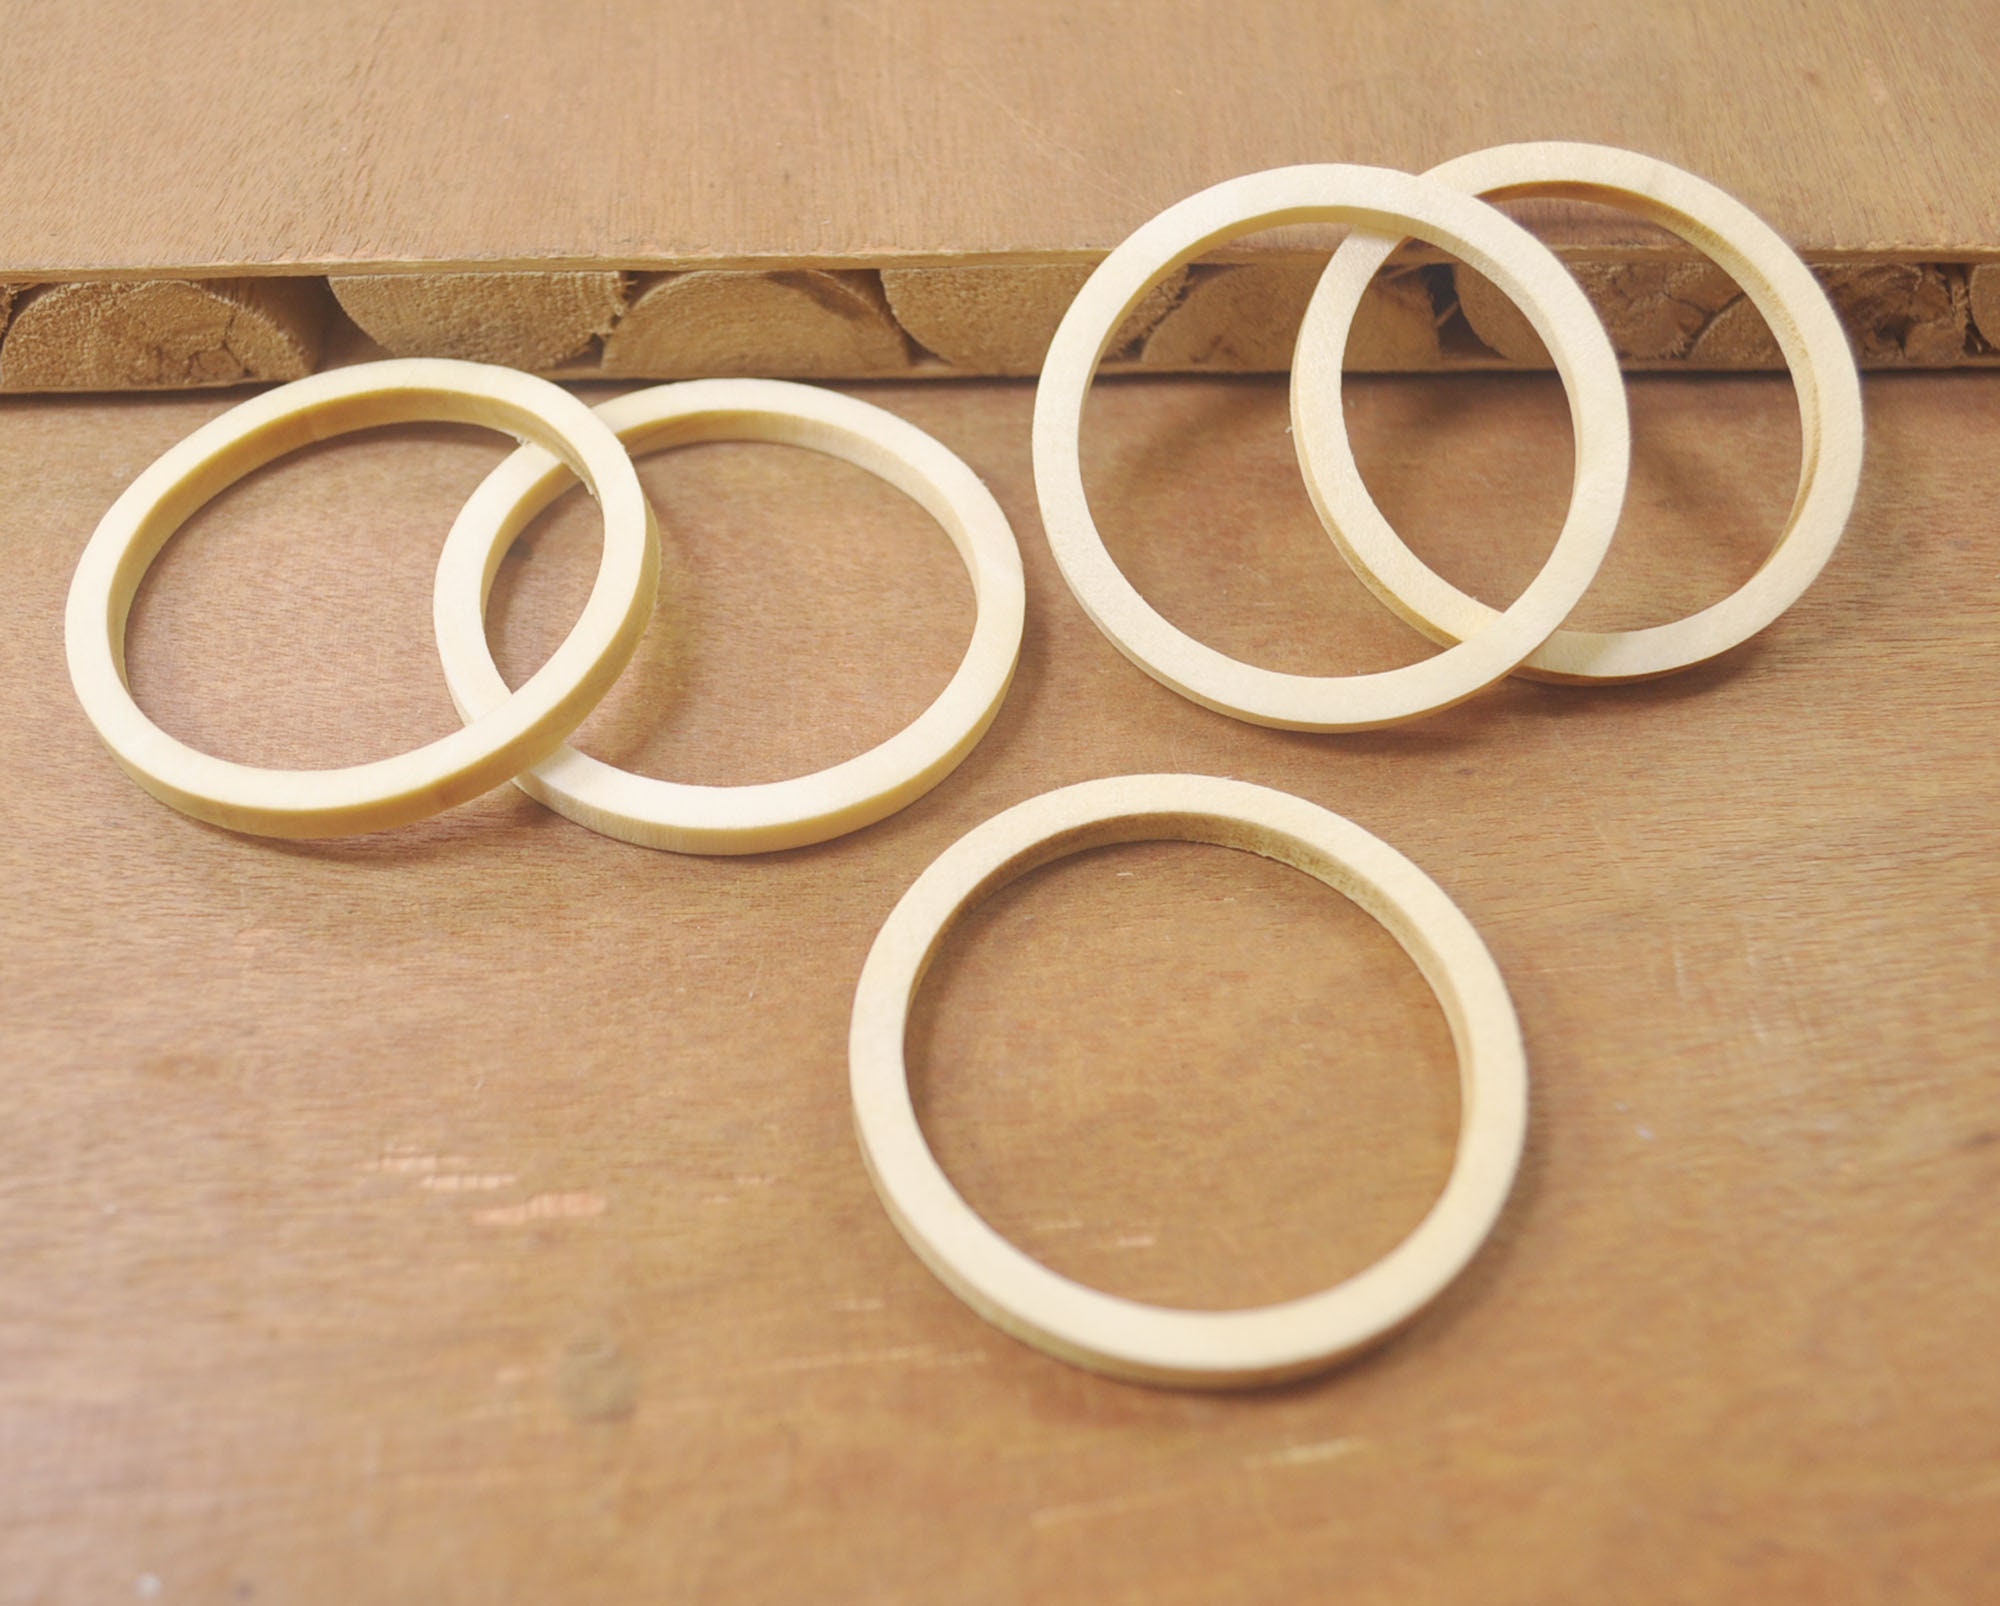 Wood Rings for Crafts 2 Inch, Pack of 5 Unfinished Wooden Rings